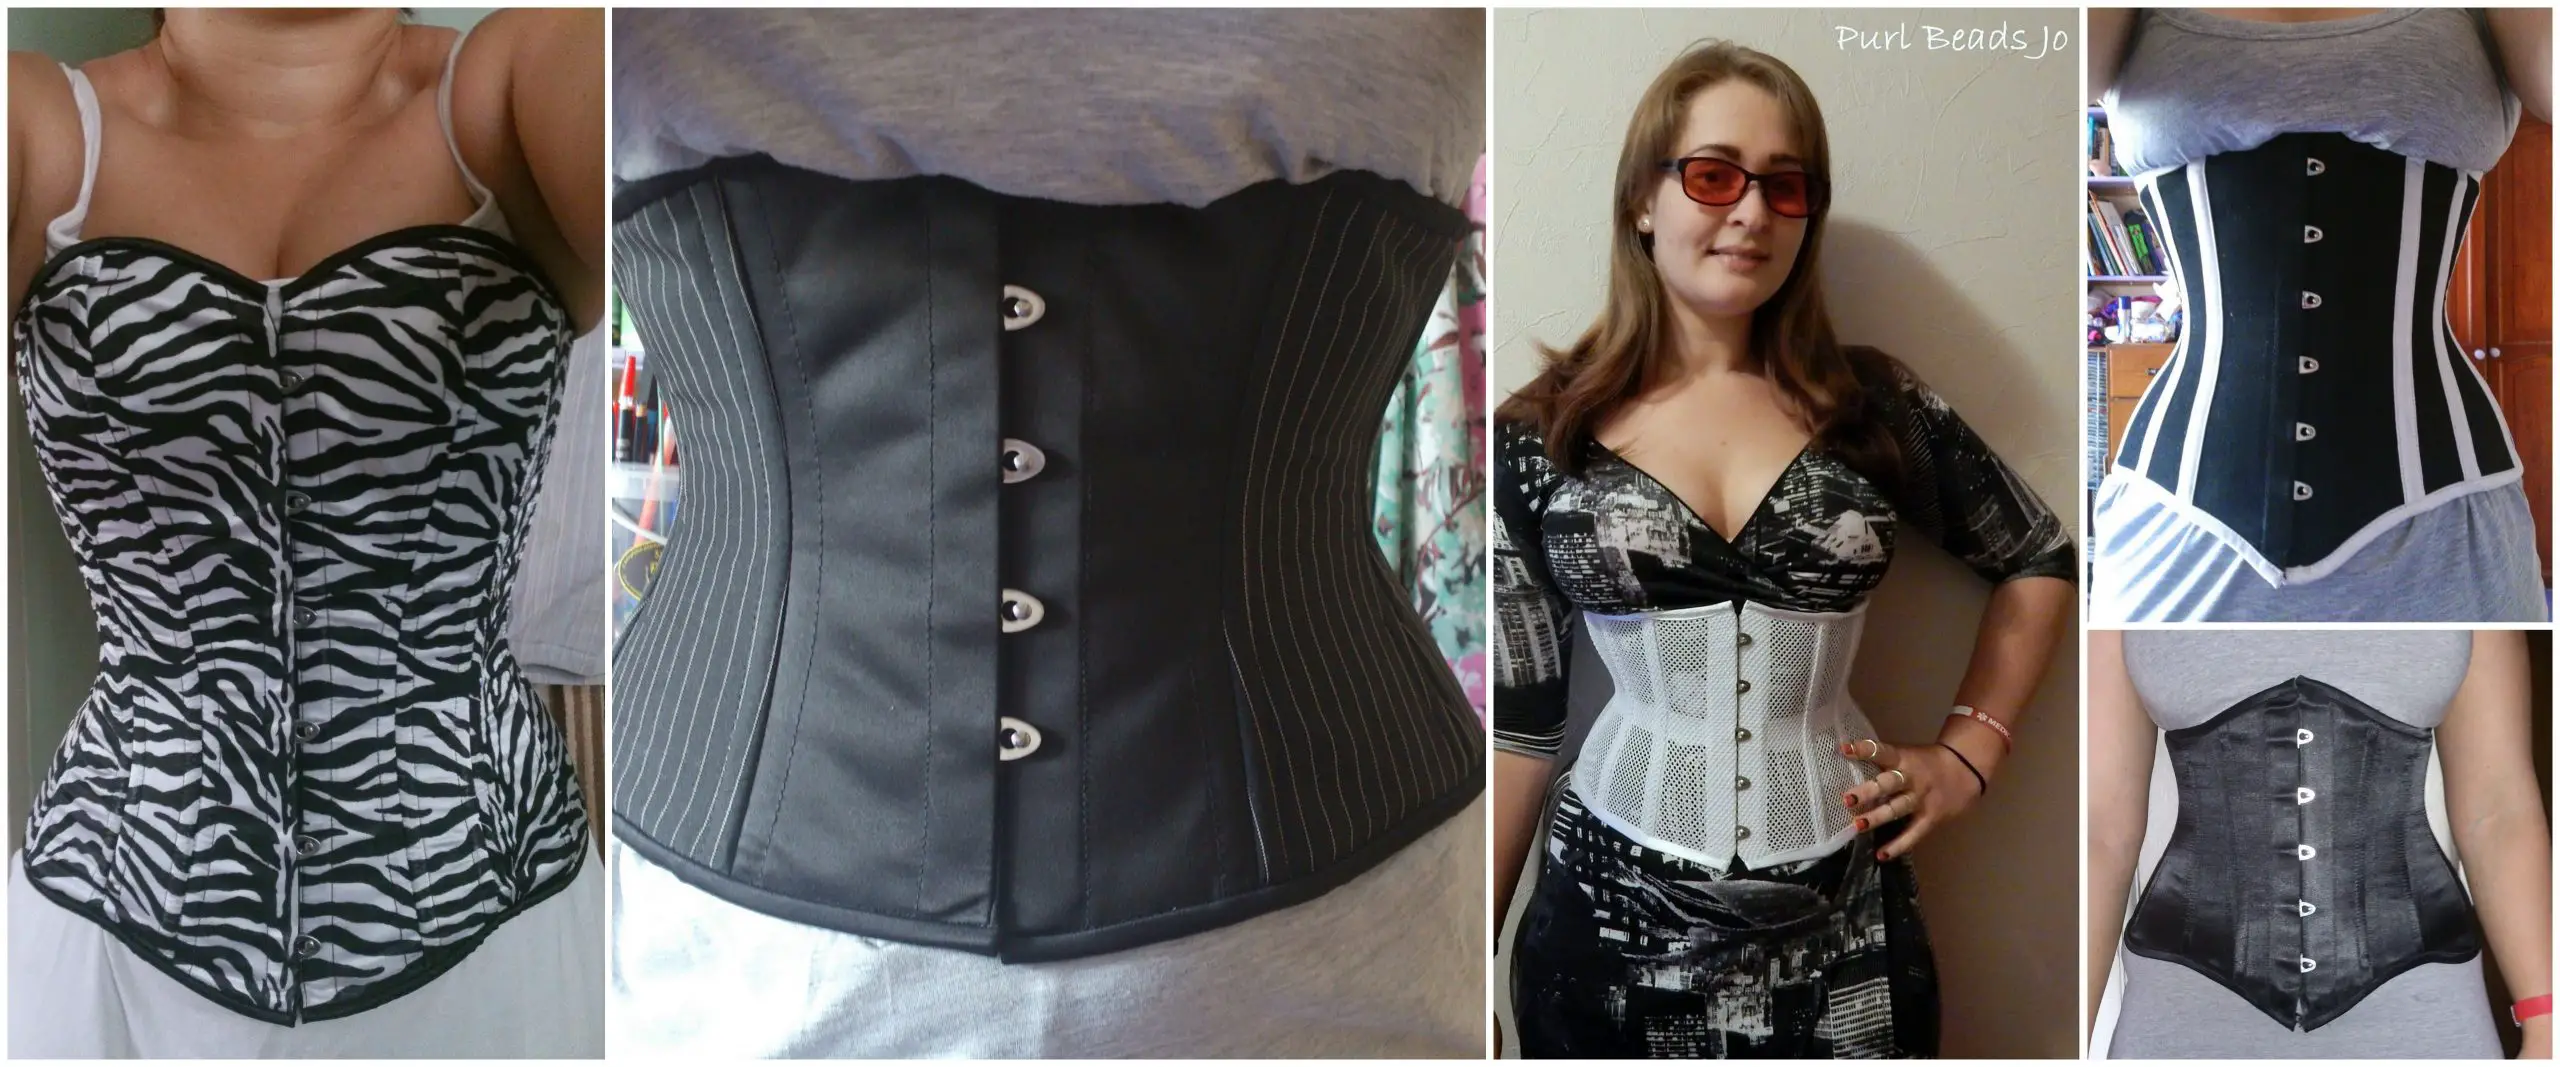 Corset wearing for chronic back pain